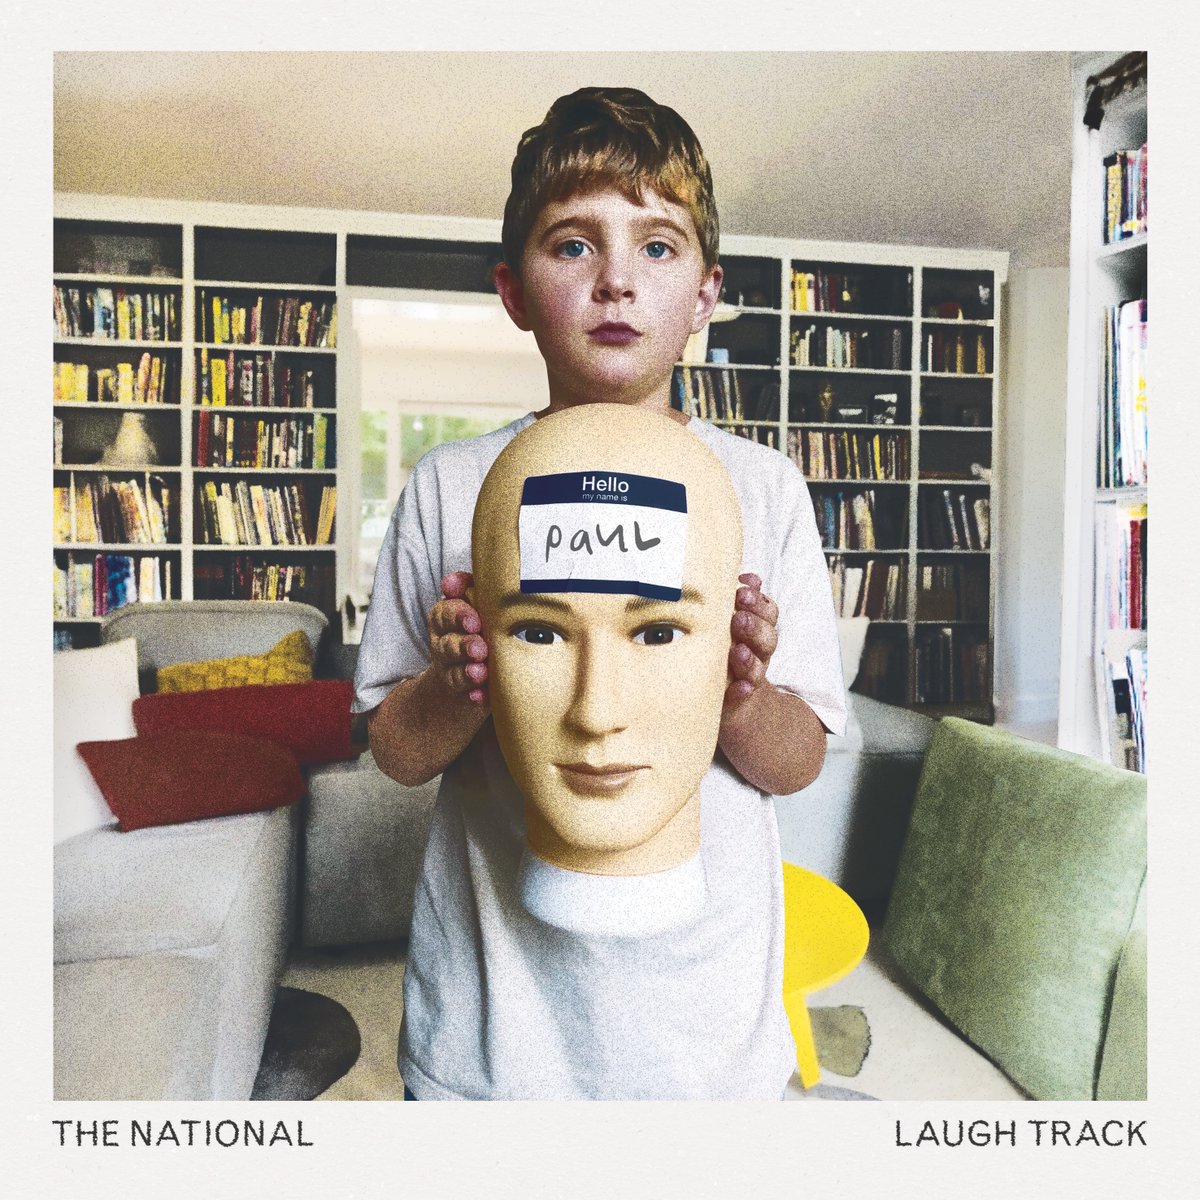 Our brand new album Laugh Track is out now. Laugh Track features guest appearances by @phoebe_bridgers and @rosannecash, and provides a home for our @boniver collaboration “Weird Goodbyes”. Stream the album now: thenational.ffm.to/laughtrack